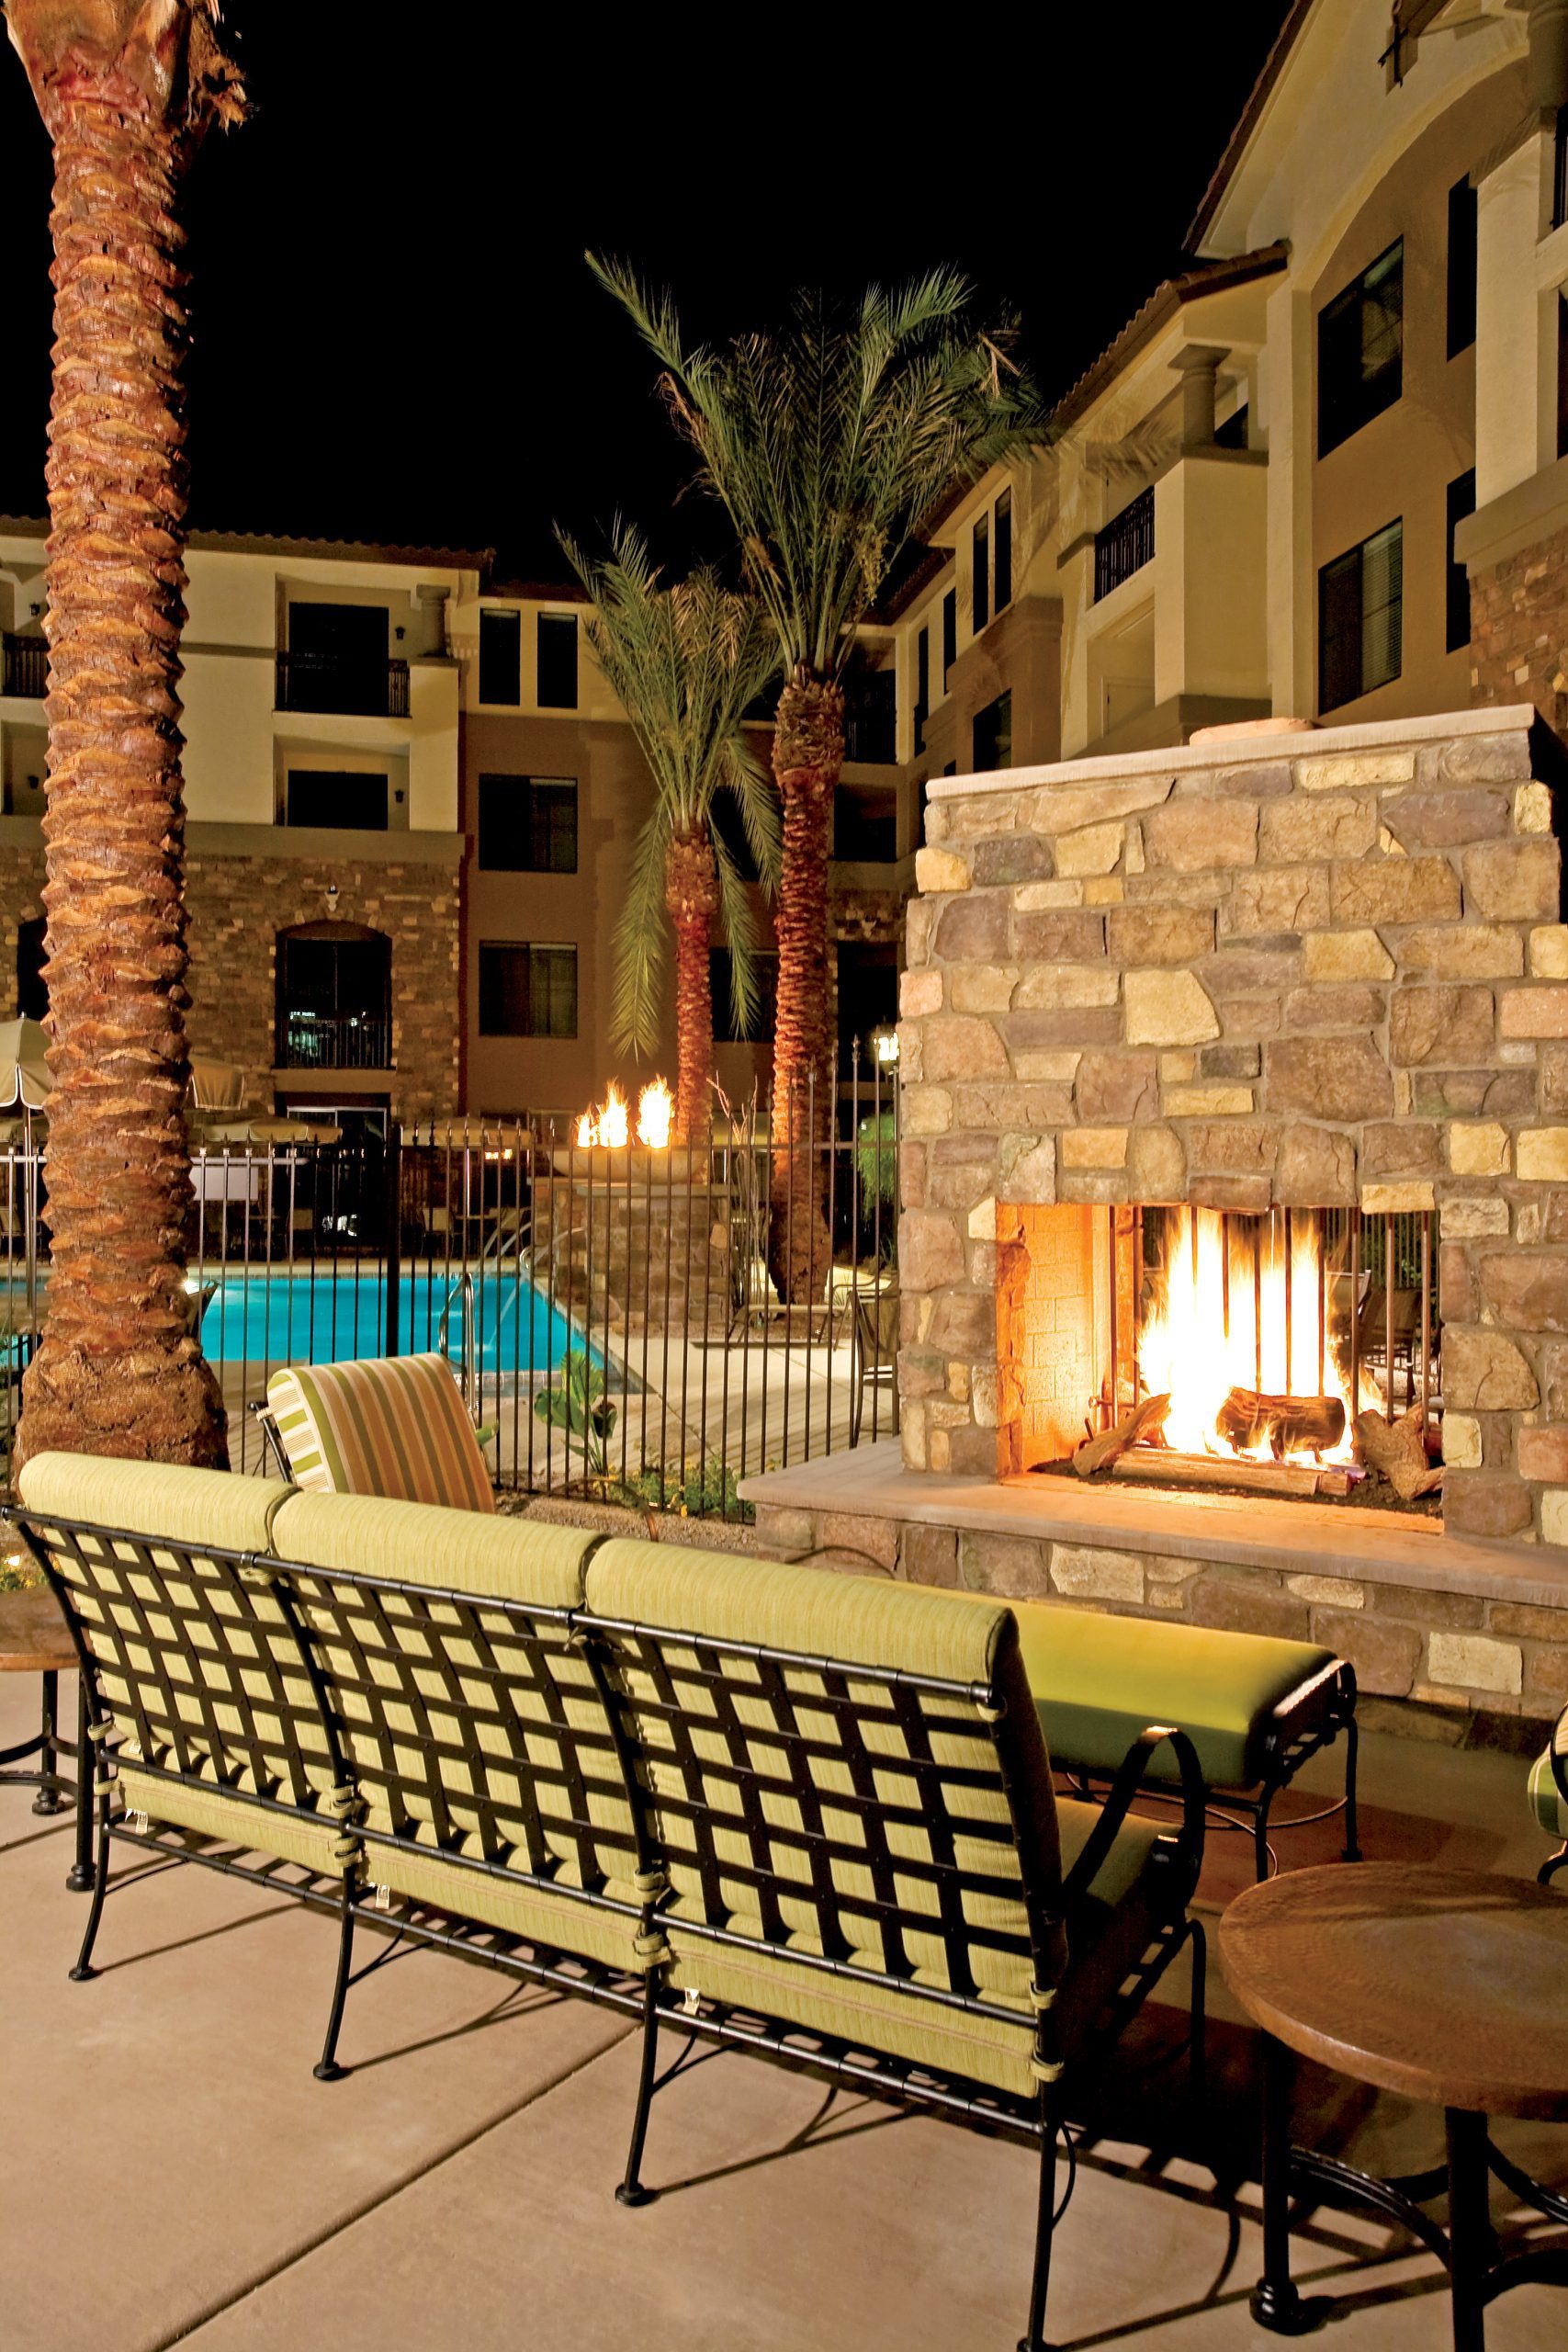 La Siena outdoor fireplace and pool